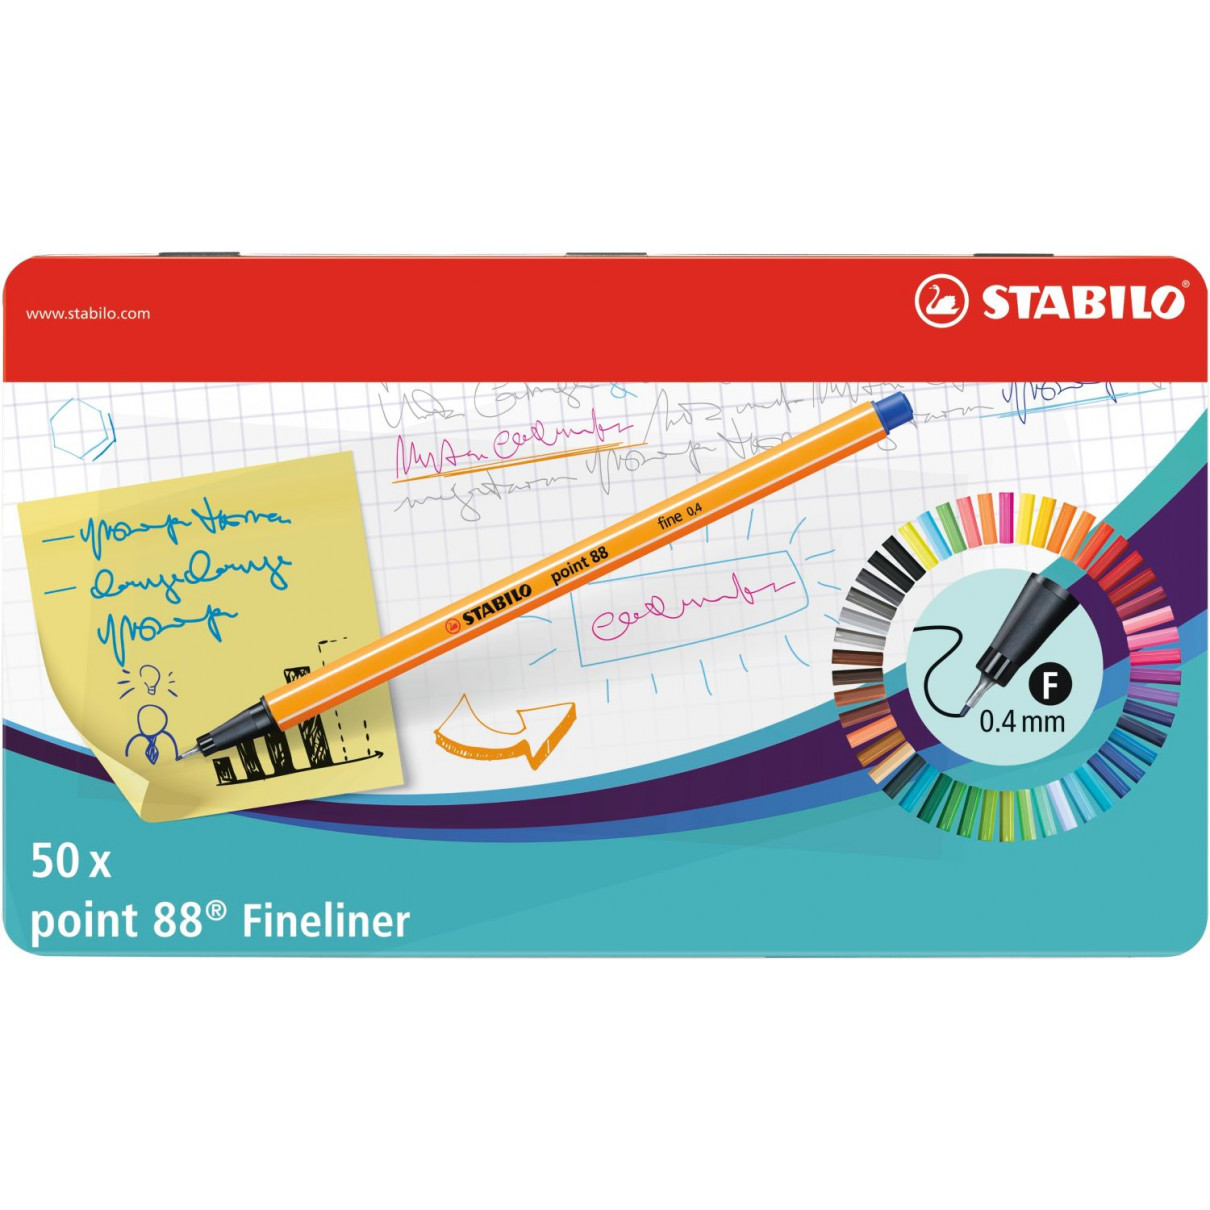 STABILO point 88 Fineliner - Tin of 50 - Assorted Colours